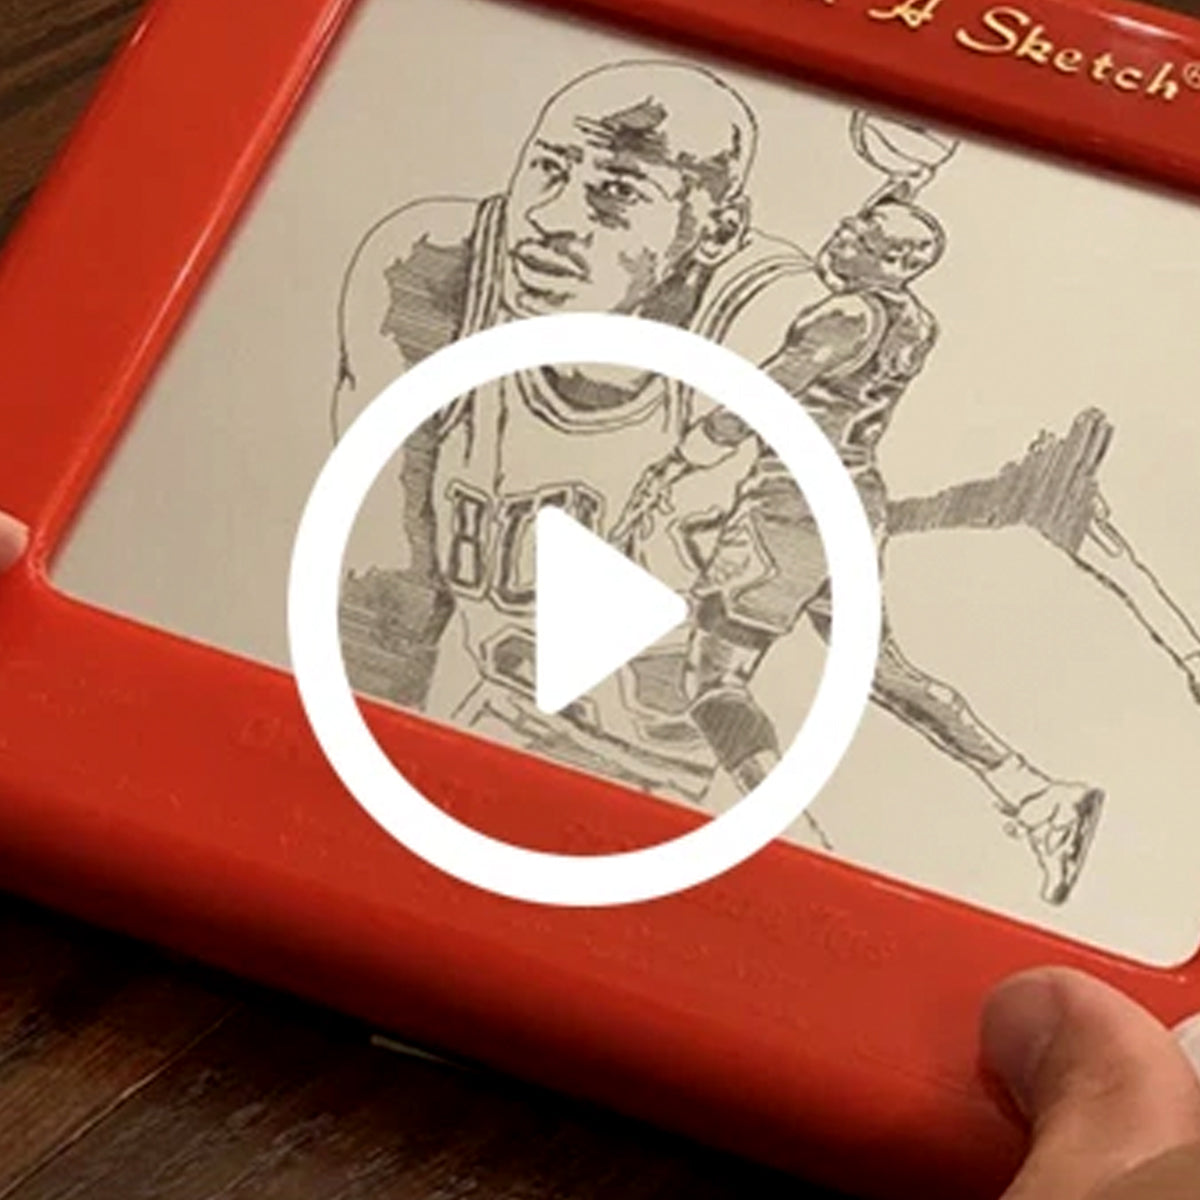 In Honor of The Last Dance Check out George's new MJ Etch and our newest launch!